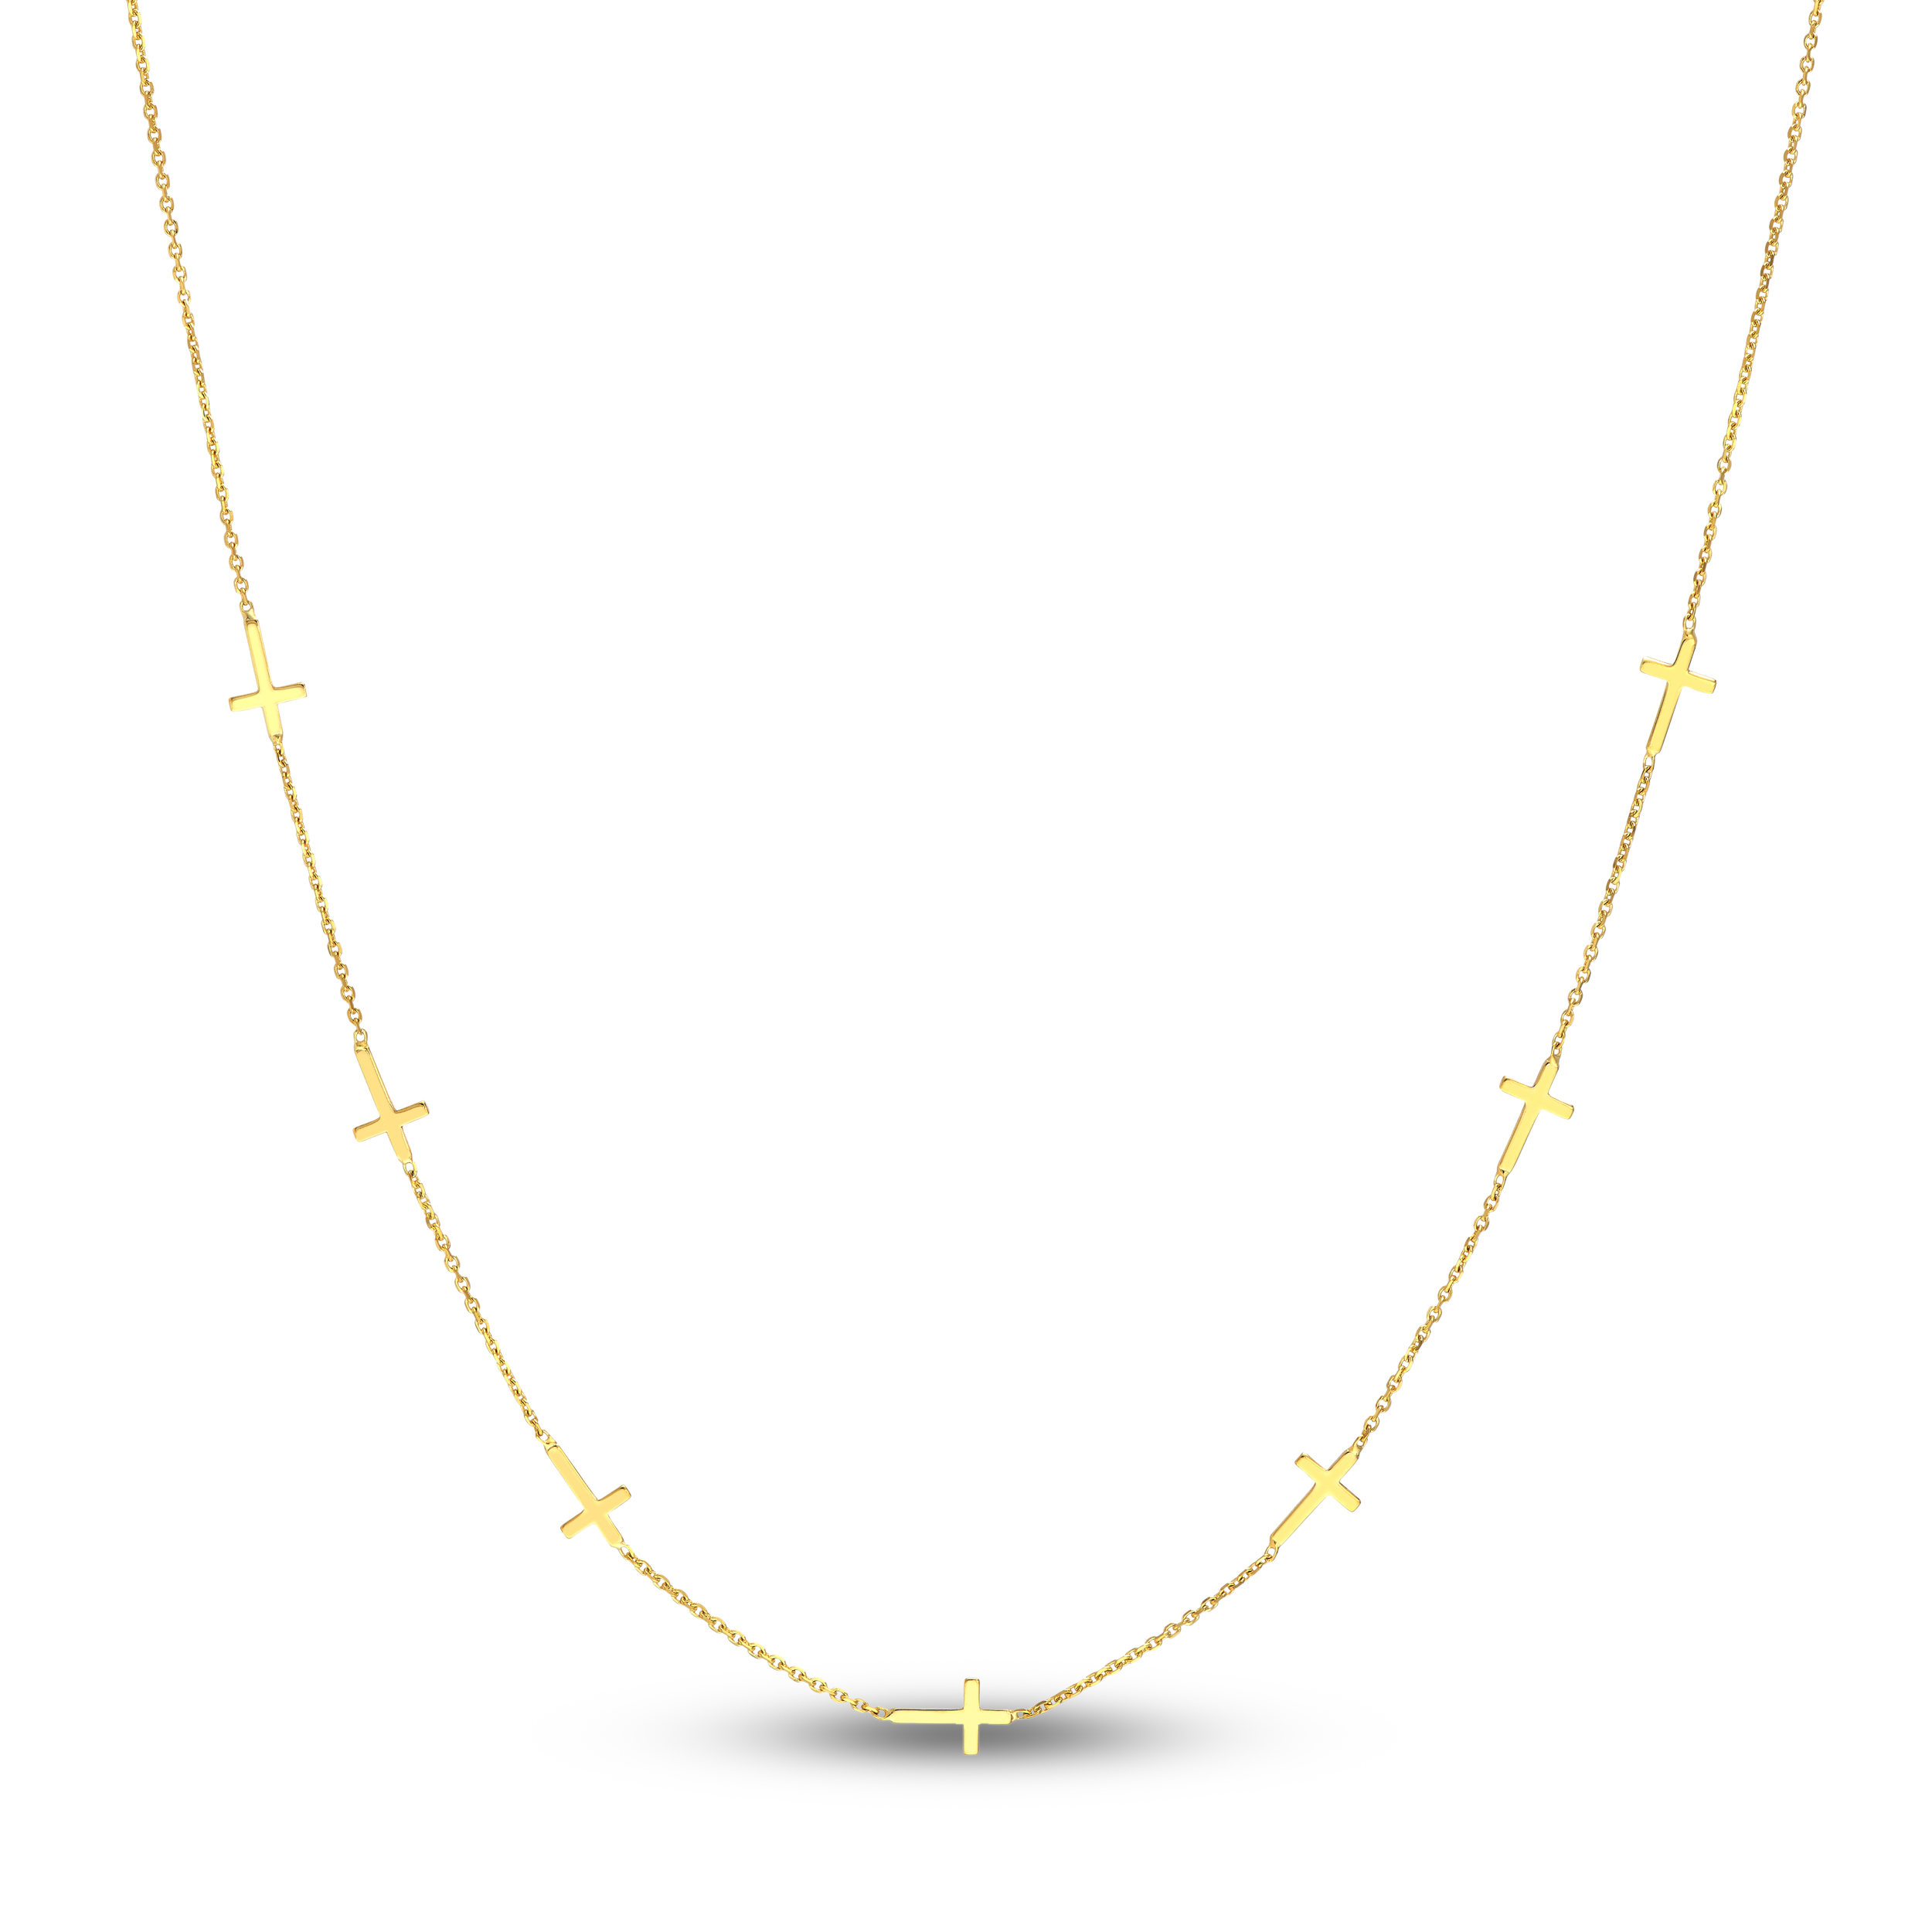 7 Cross Station Necklace 14K Yellow Gold 16\" MVg3uBYj